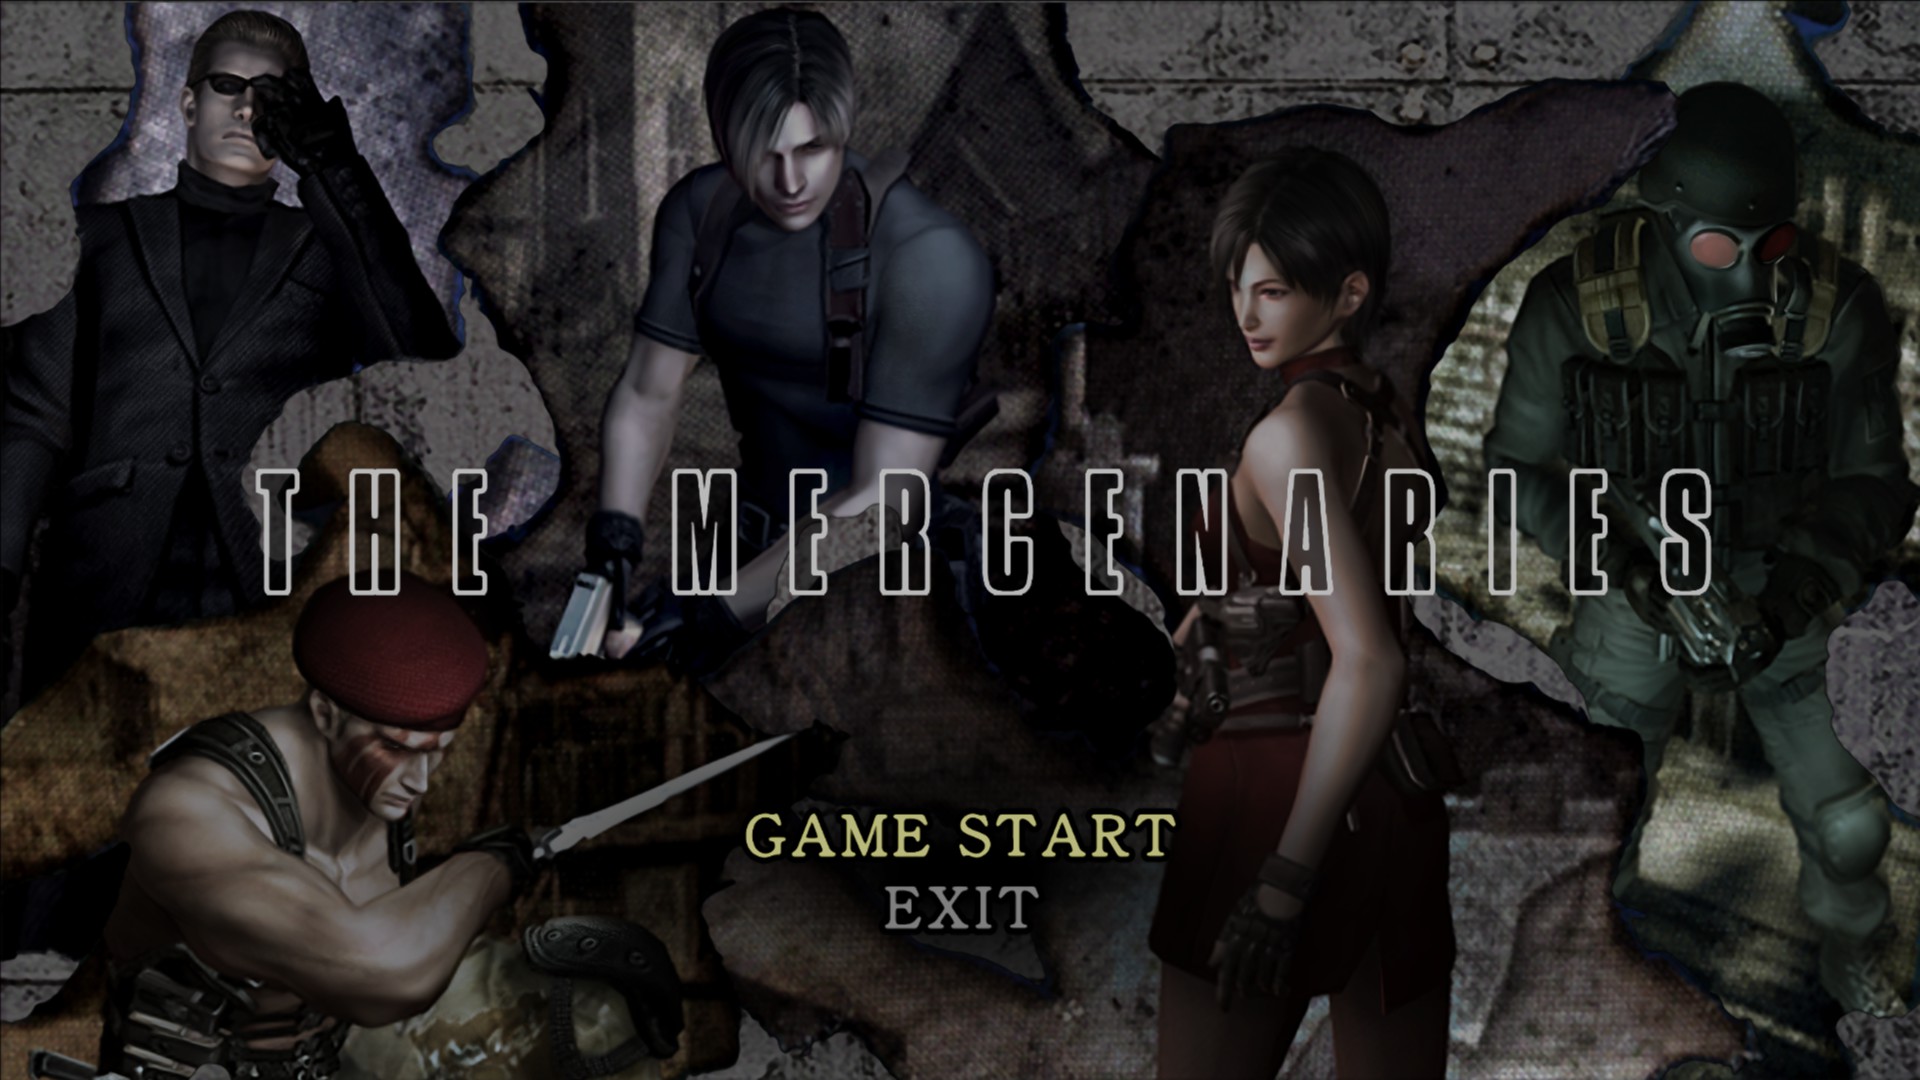 resident evil 4 wiki characters